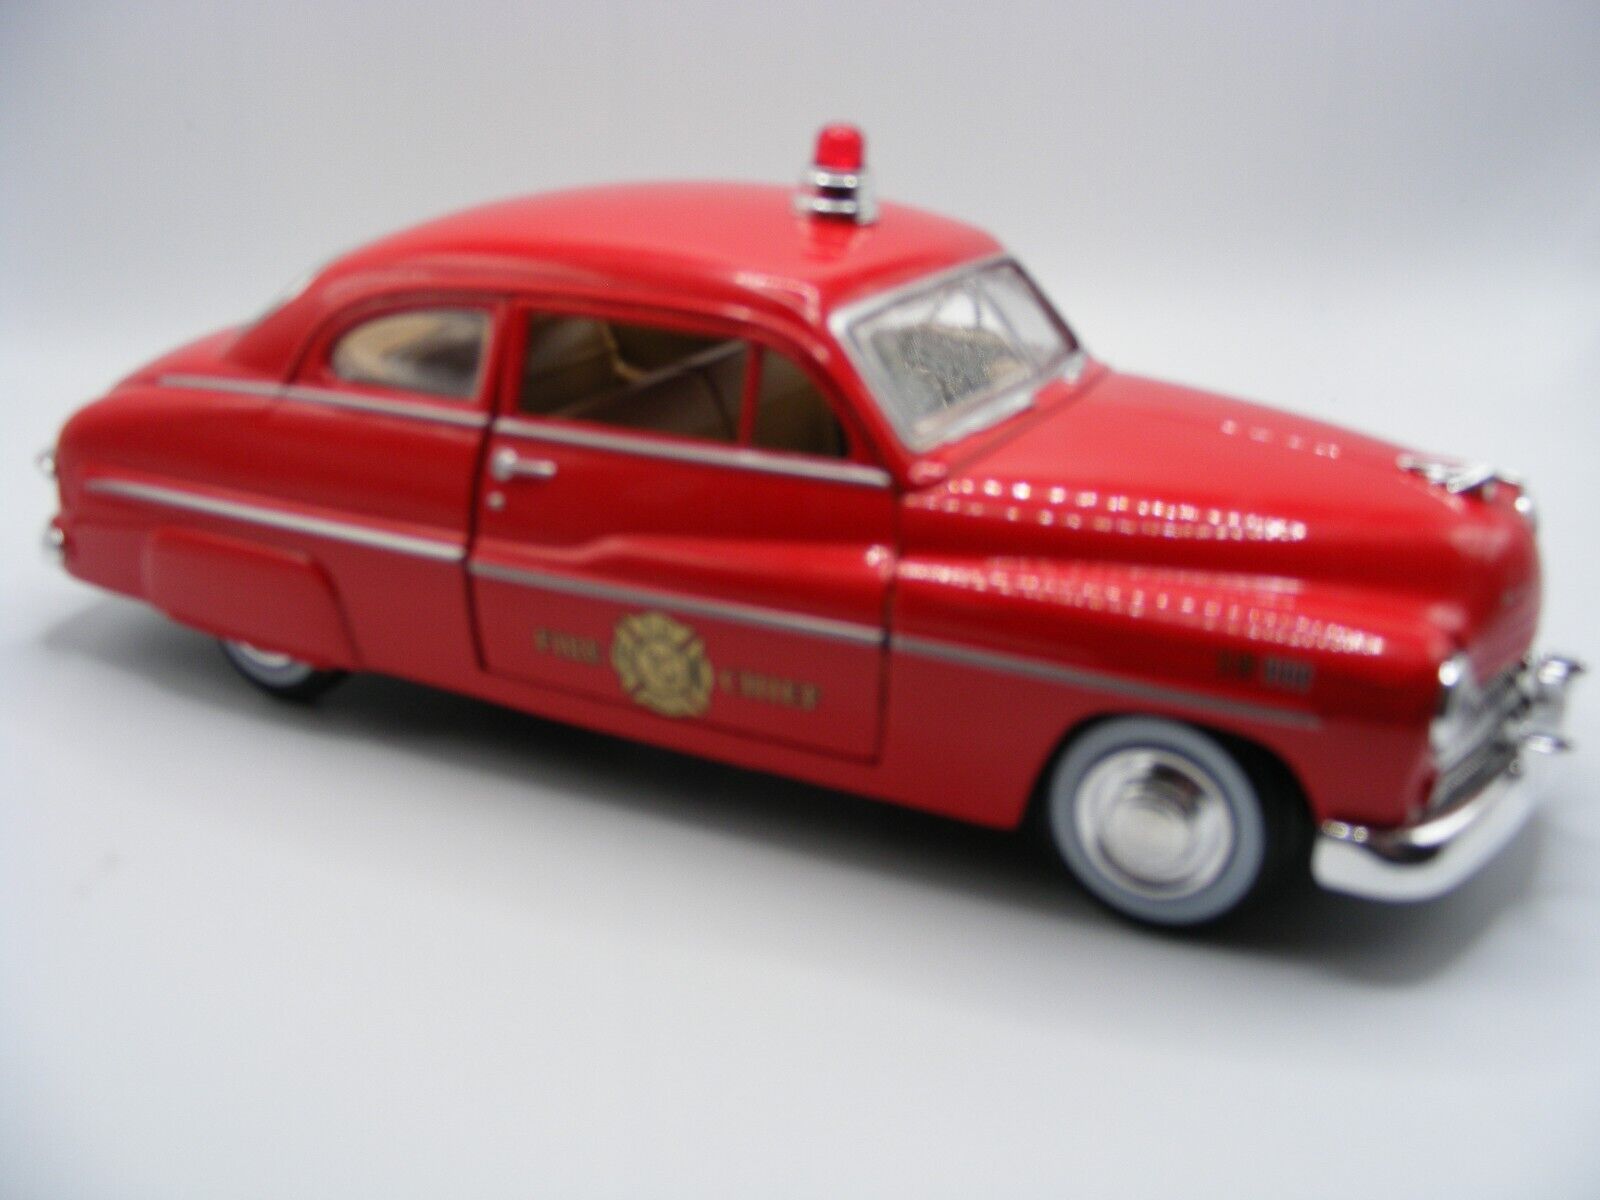 1949 Mercury Coupe Fire Chief Die Cast Car- 1:24 scale by Motor Max #76400